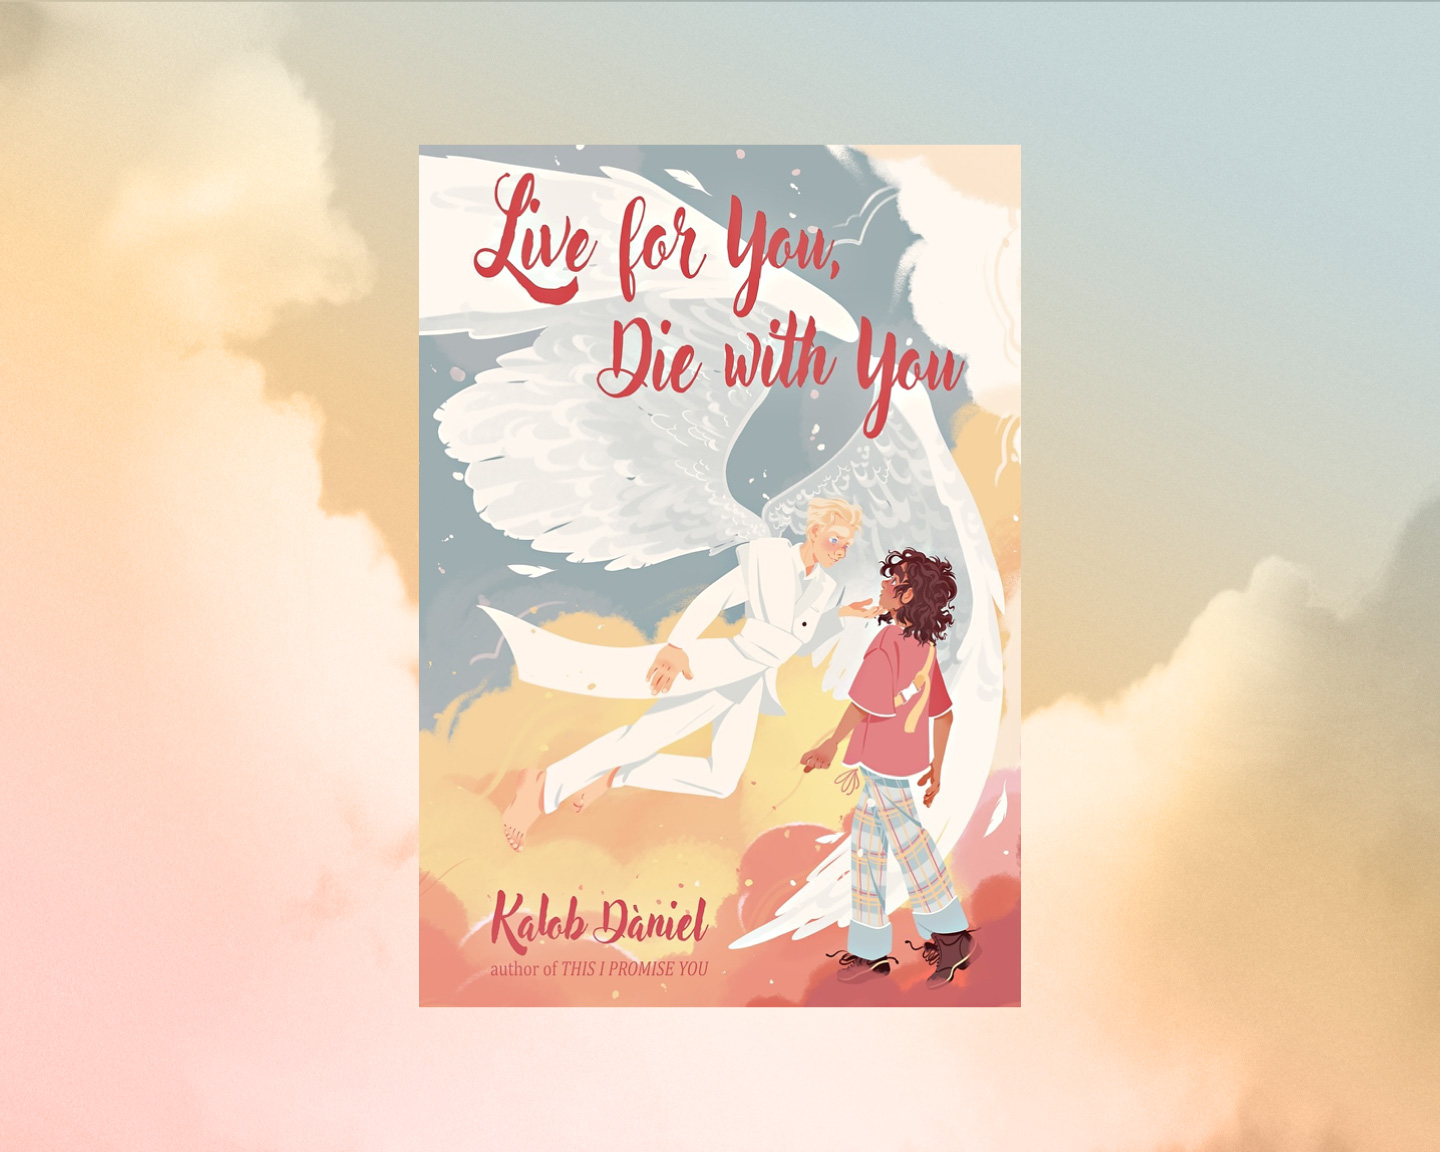 The cover for Live For You, Die With You by Kalob Dàniel